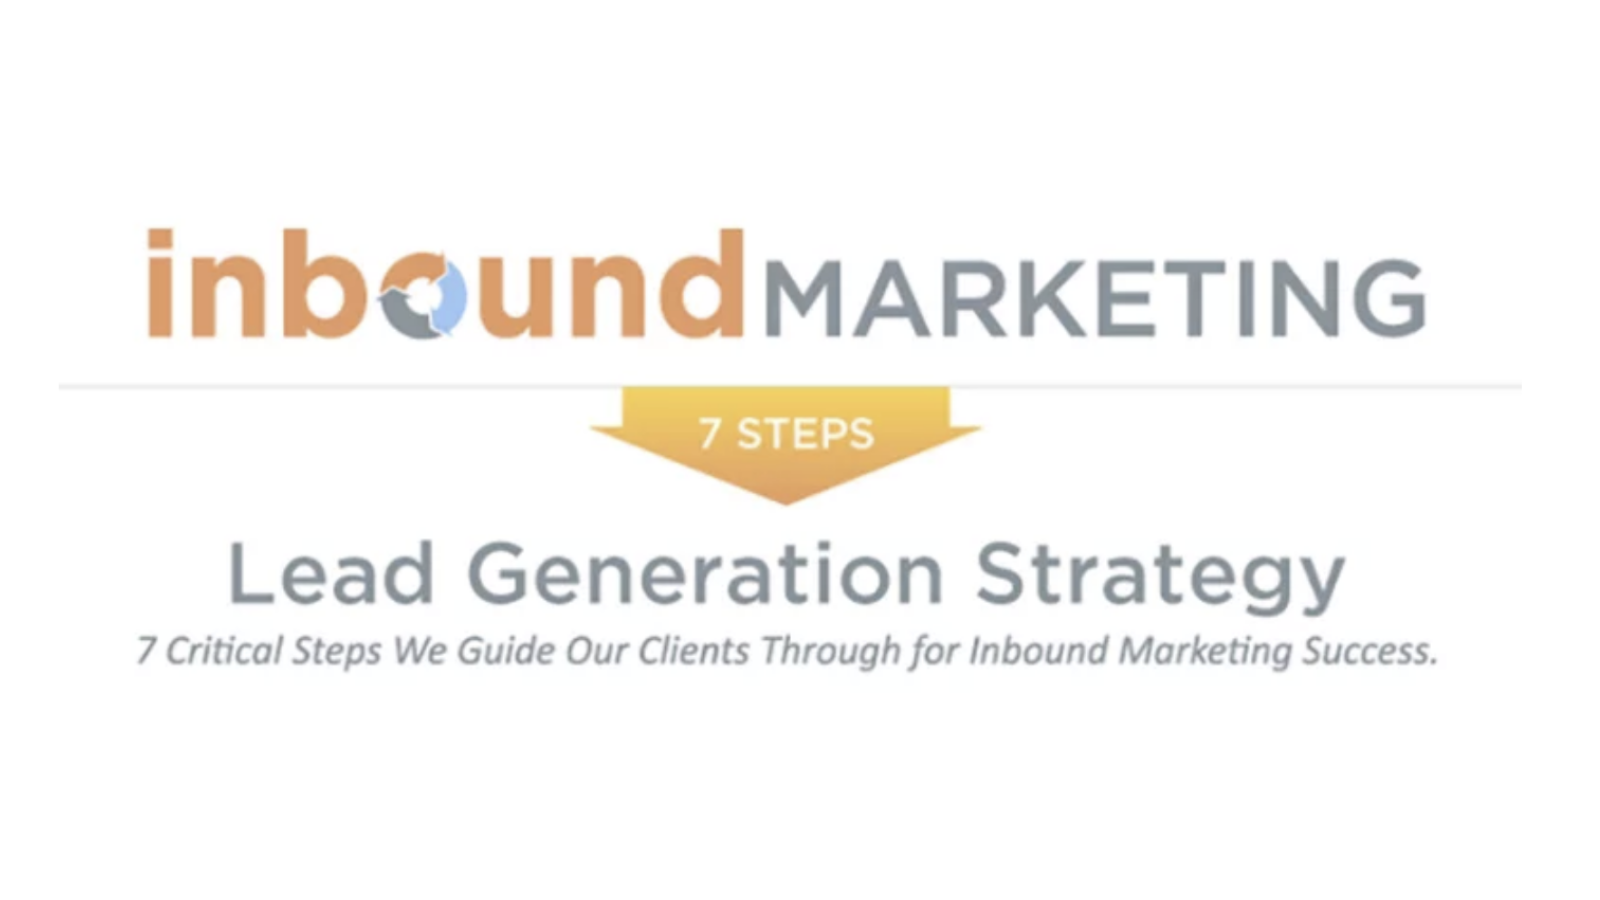 Inbound Marketing 101: The Seven Steps to Lead Generation [Infographic]